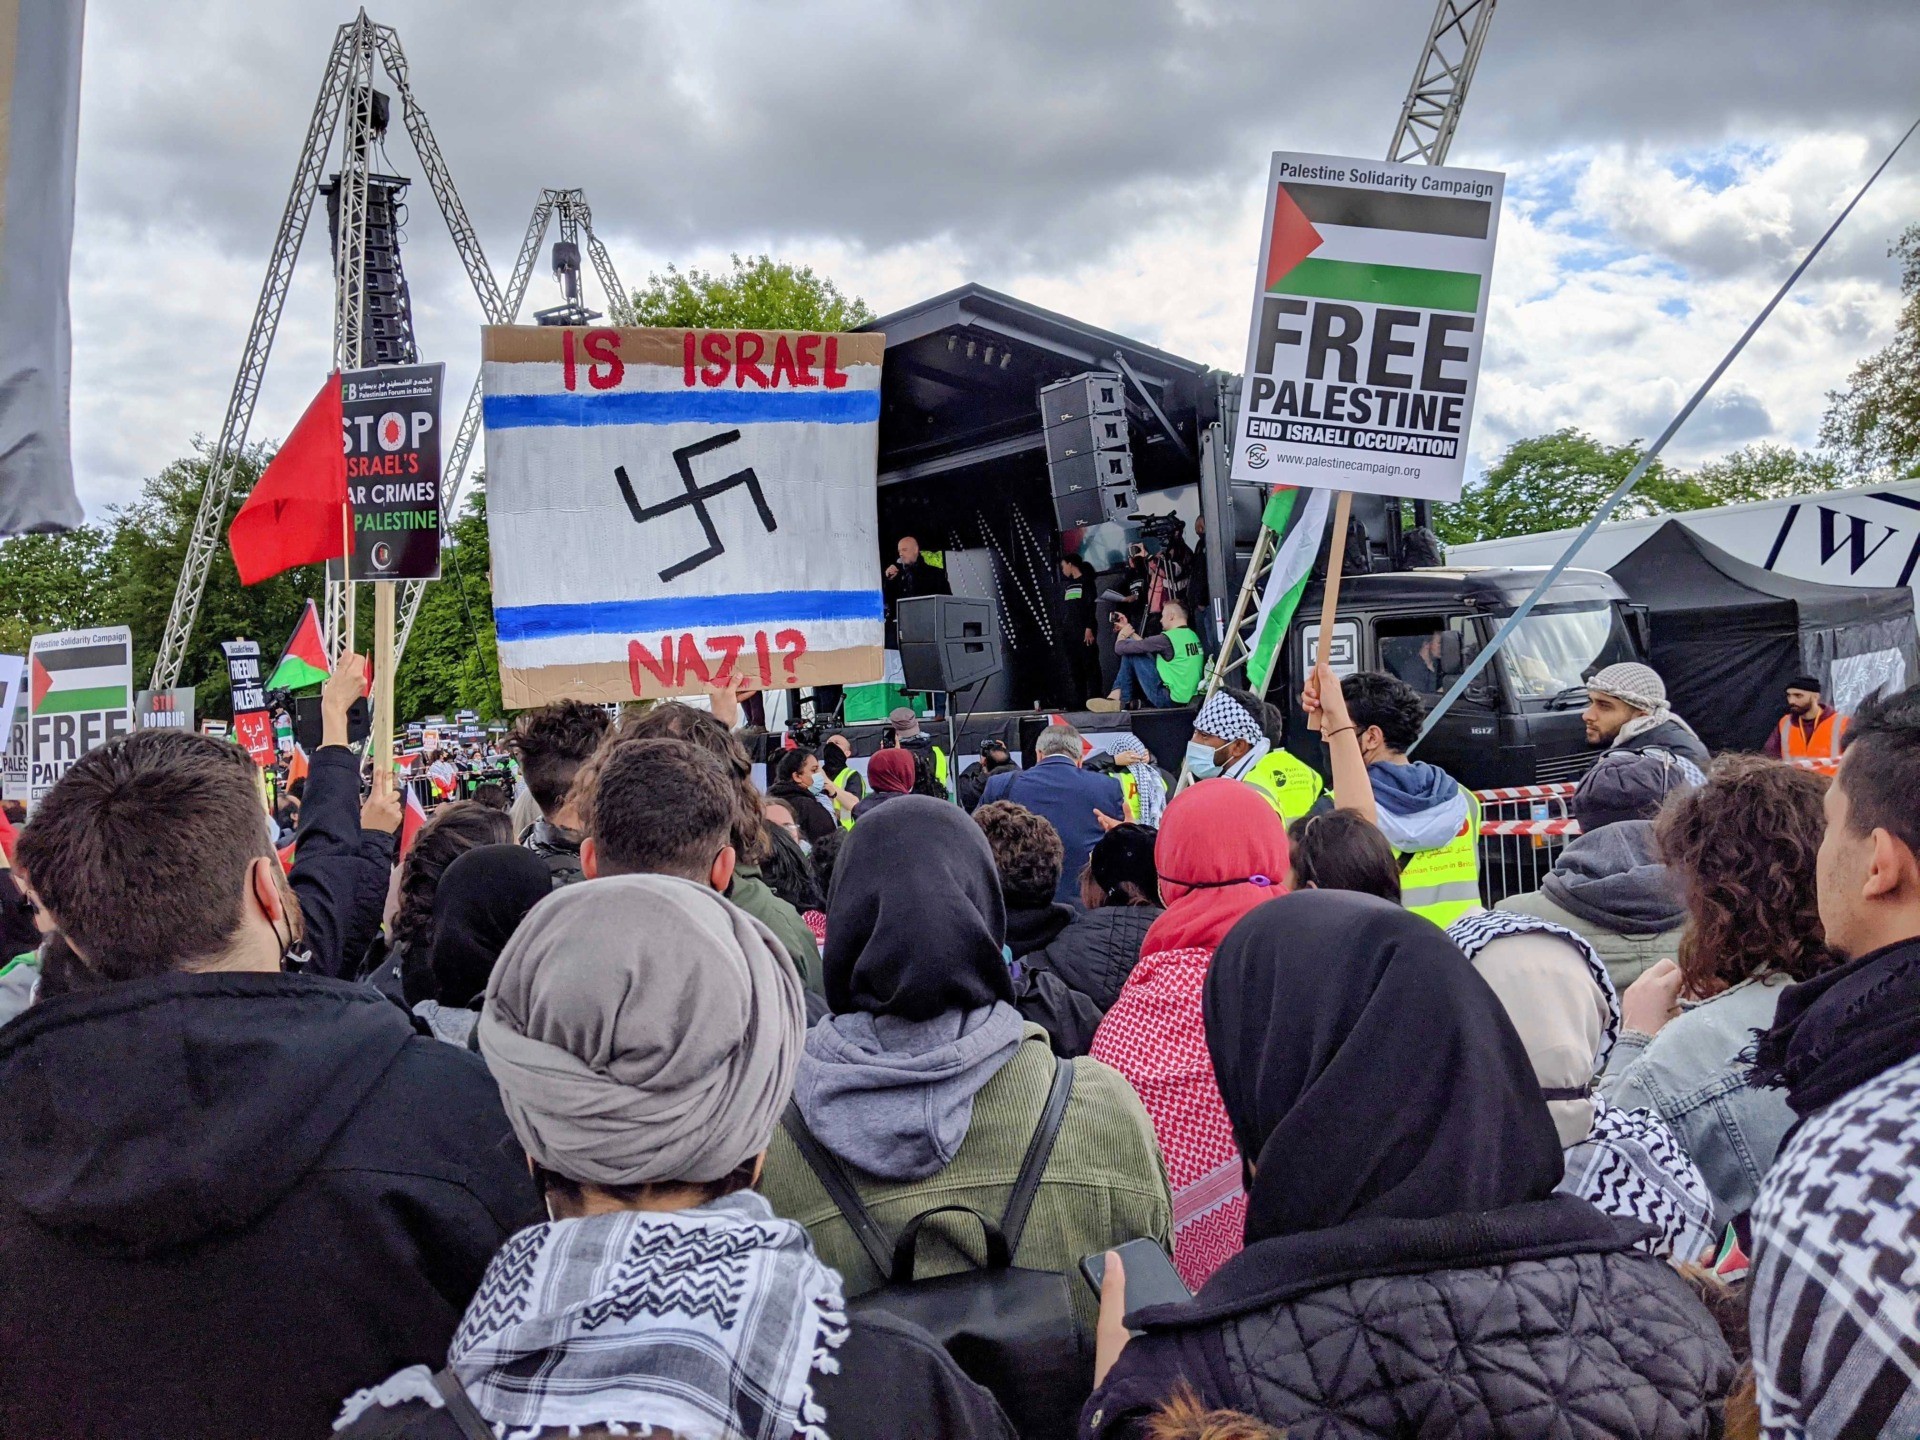 An anti-Semitic placard comparing the Jewish state of Israel to Nazi Germany is seen at an anti-Israel protest on Saturday May 22nd, 2021. Kurt Zindulka, Breitbart News